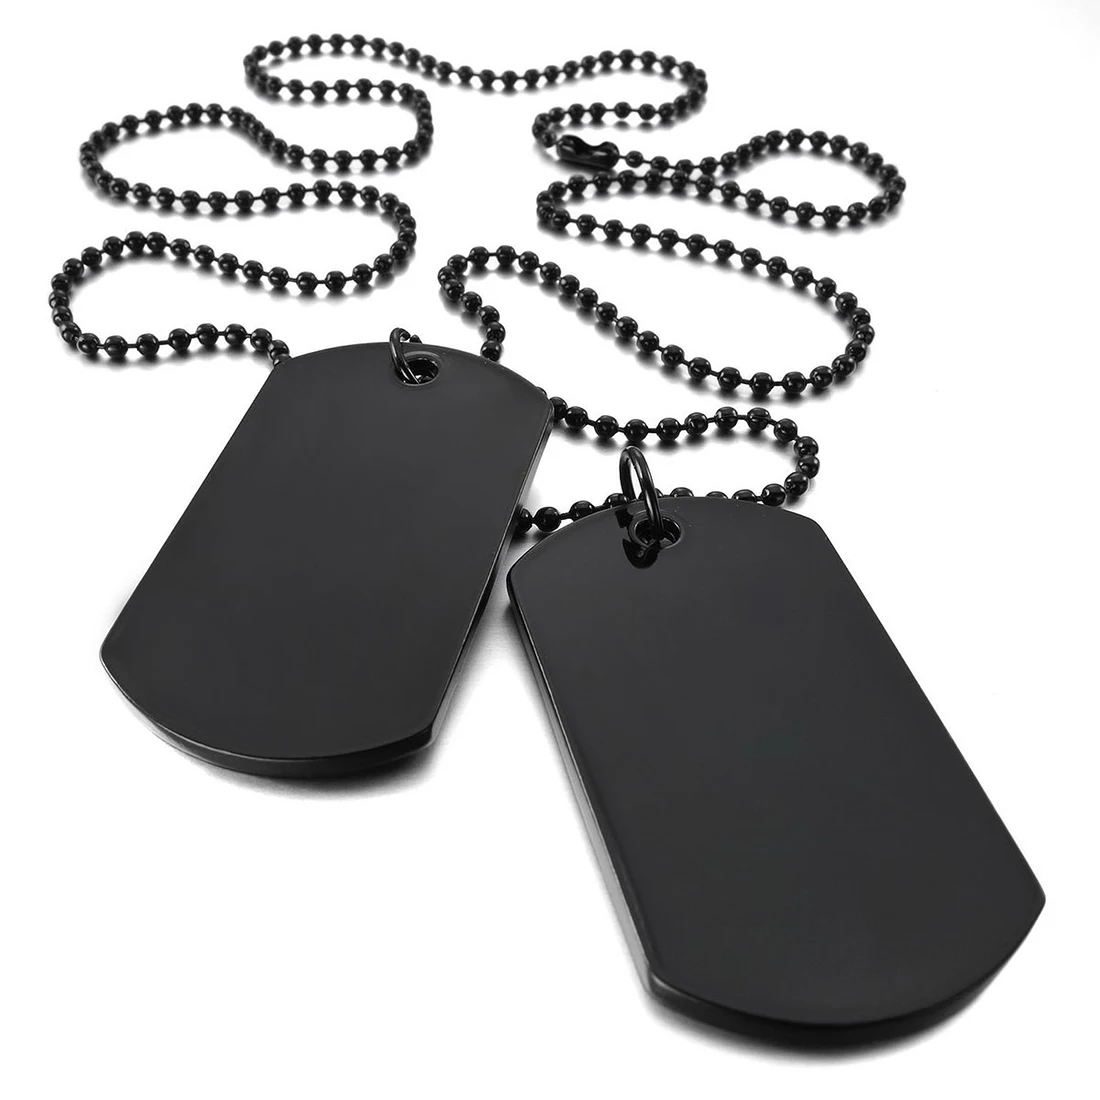 2 PCS Alloy Pendant Necklace Pendant Black Double Dog Tag plate Army Tribal Style Chain Necklace Man, Woman